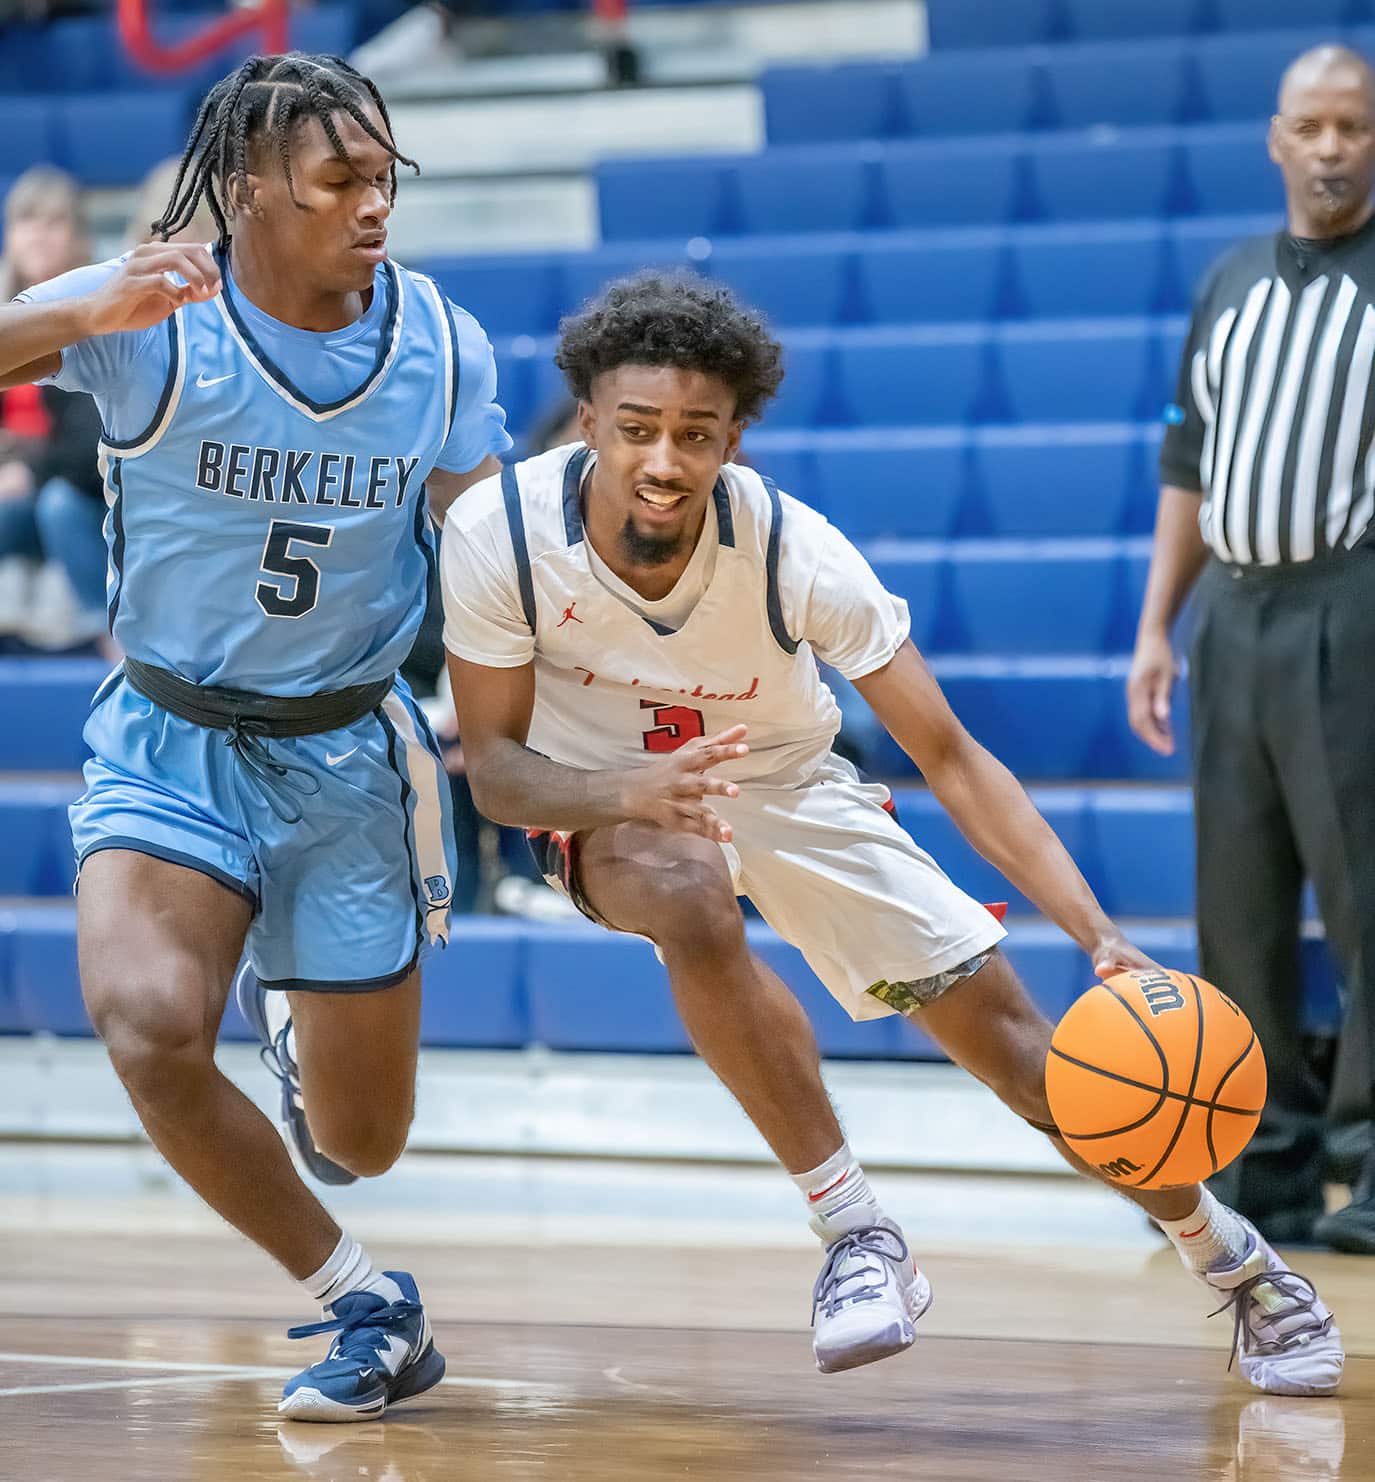 Springstead High, 3, Divine Torain, tries to drive past the defense by Berkely Prep ,5, Damien Henderson Wednesday in the 8th Annual Greg O’Connell Shootout at Springstead High. Photo by JOE DiCRISTOFALO